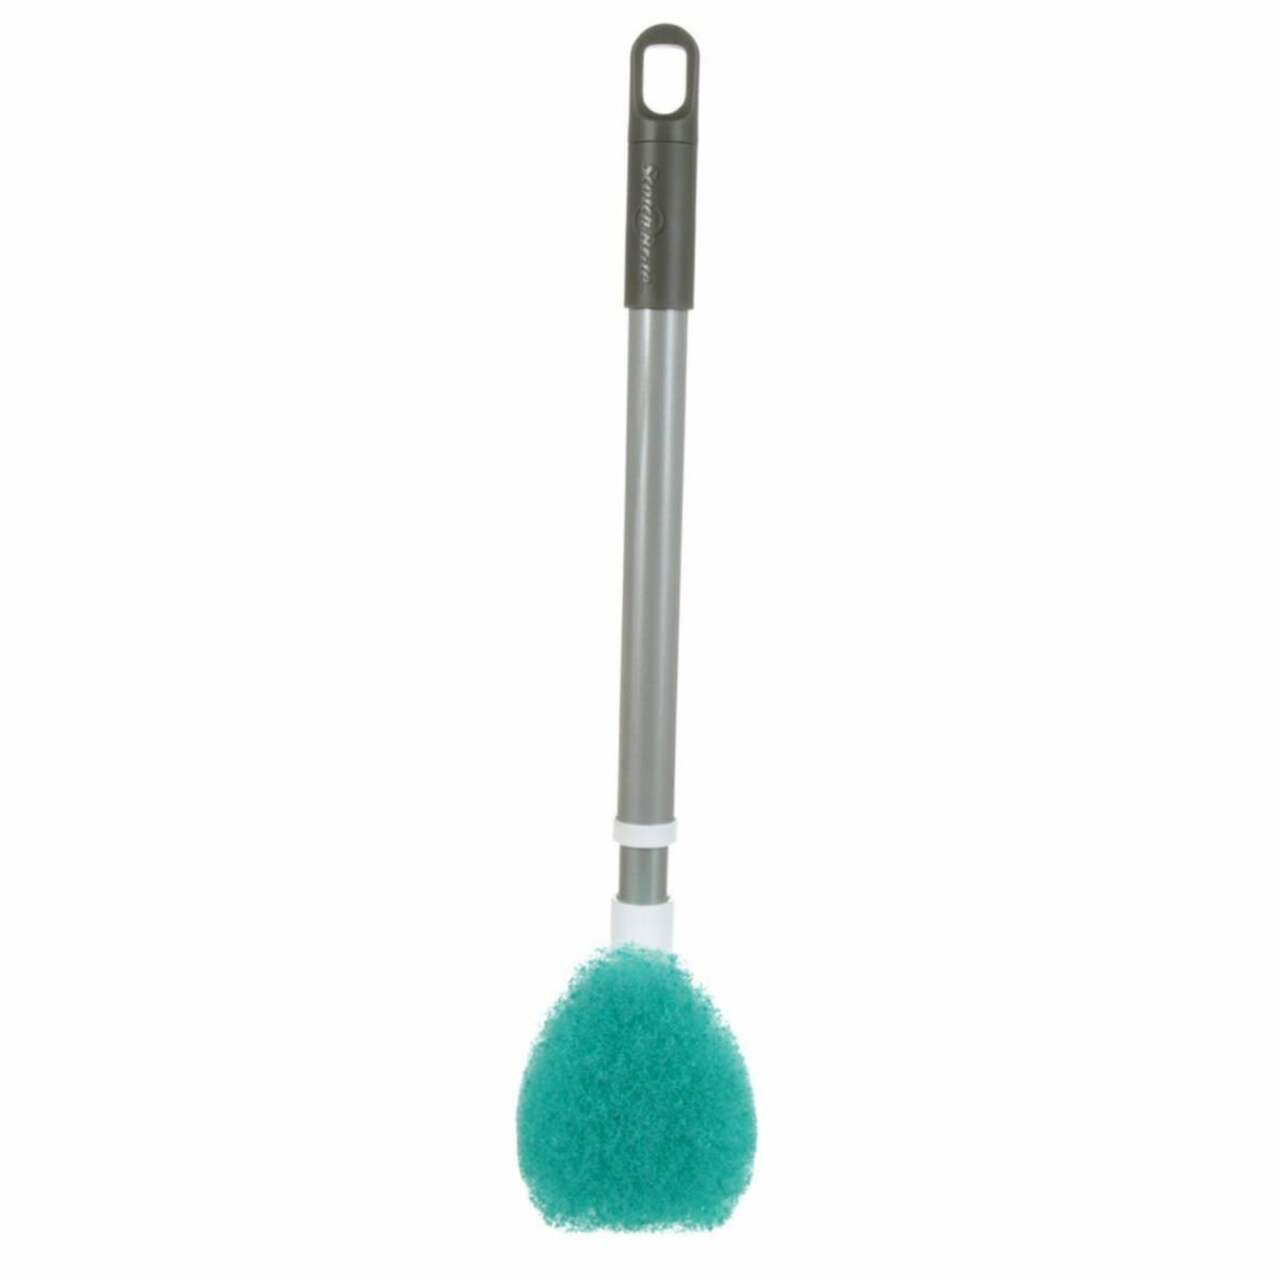 https://media-www.canadiantire.ca/product/living/cleaning/household-cleaning-tools/0428471/scotch-brite-shower-bath-scrubber-8d71e414-4a88-49e7-b351-4bc6703bb3d7-jpgrendition.jpg?imdensity=1&imwidth=1244&impolicy=mZoom